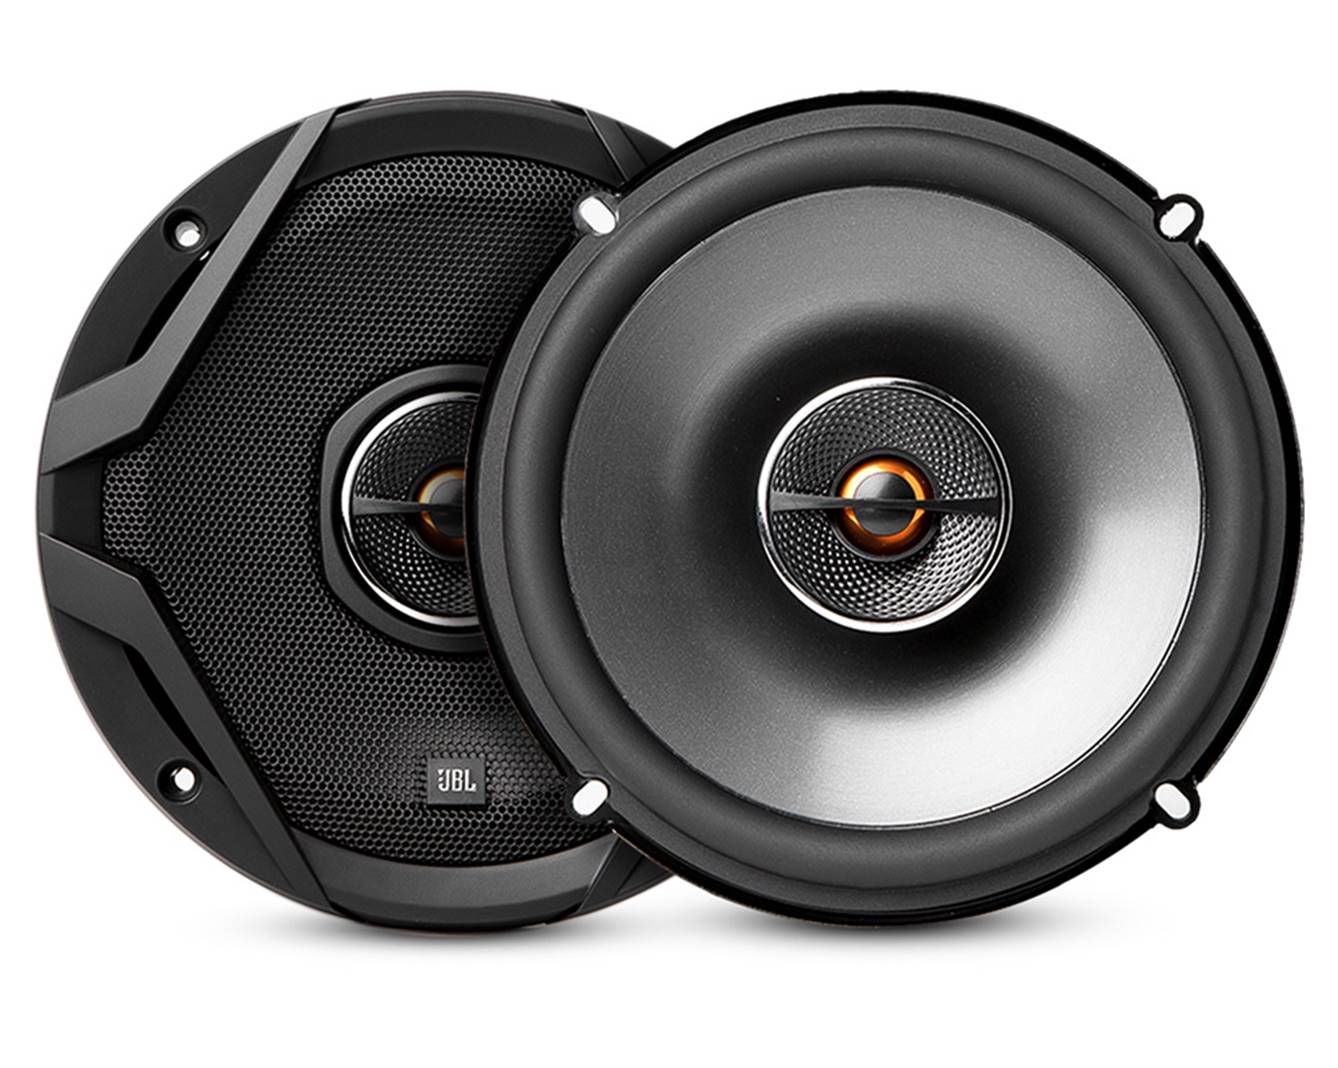 car speakers that have good bass